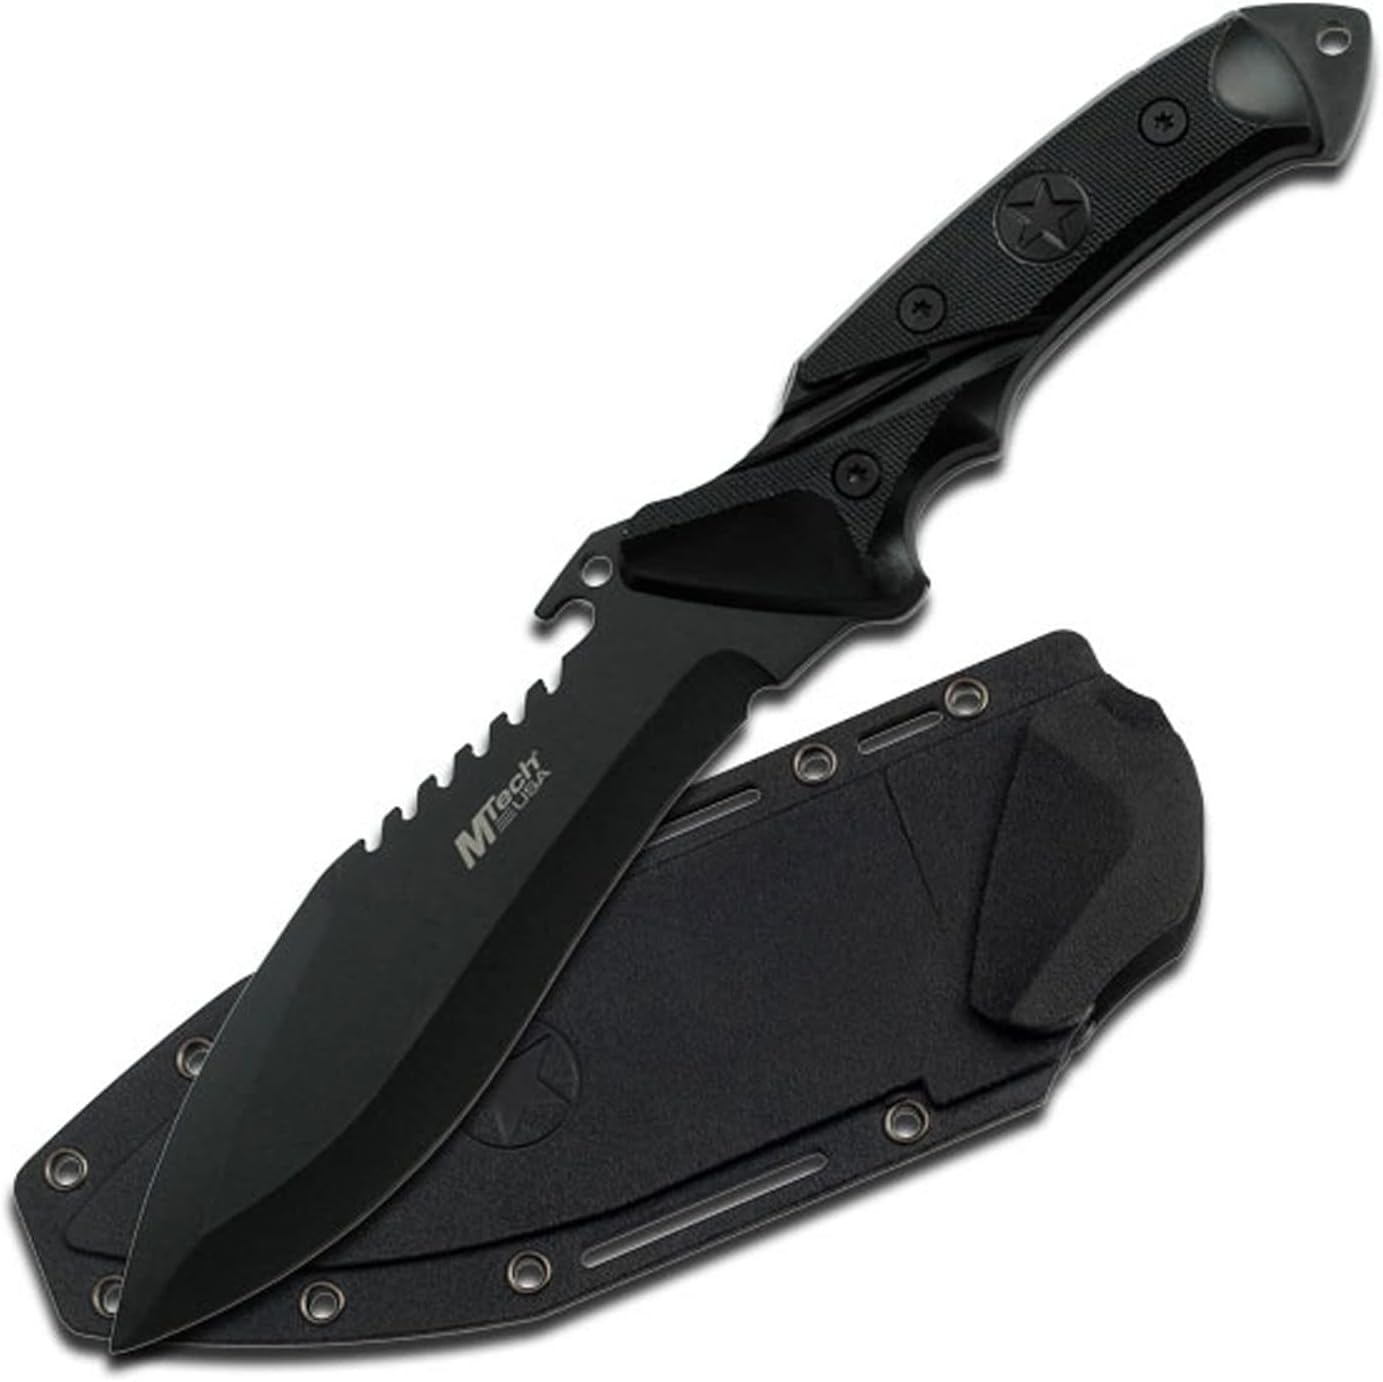  Features:          Fixed Blade Hunting Knife         10